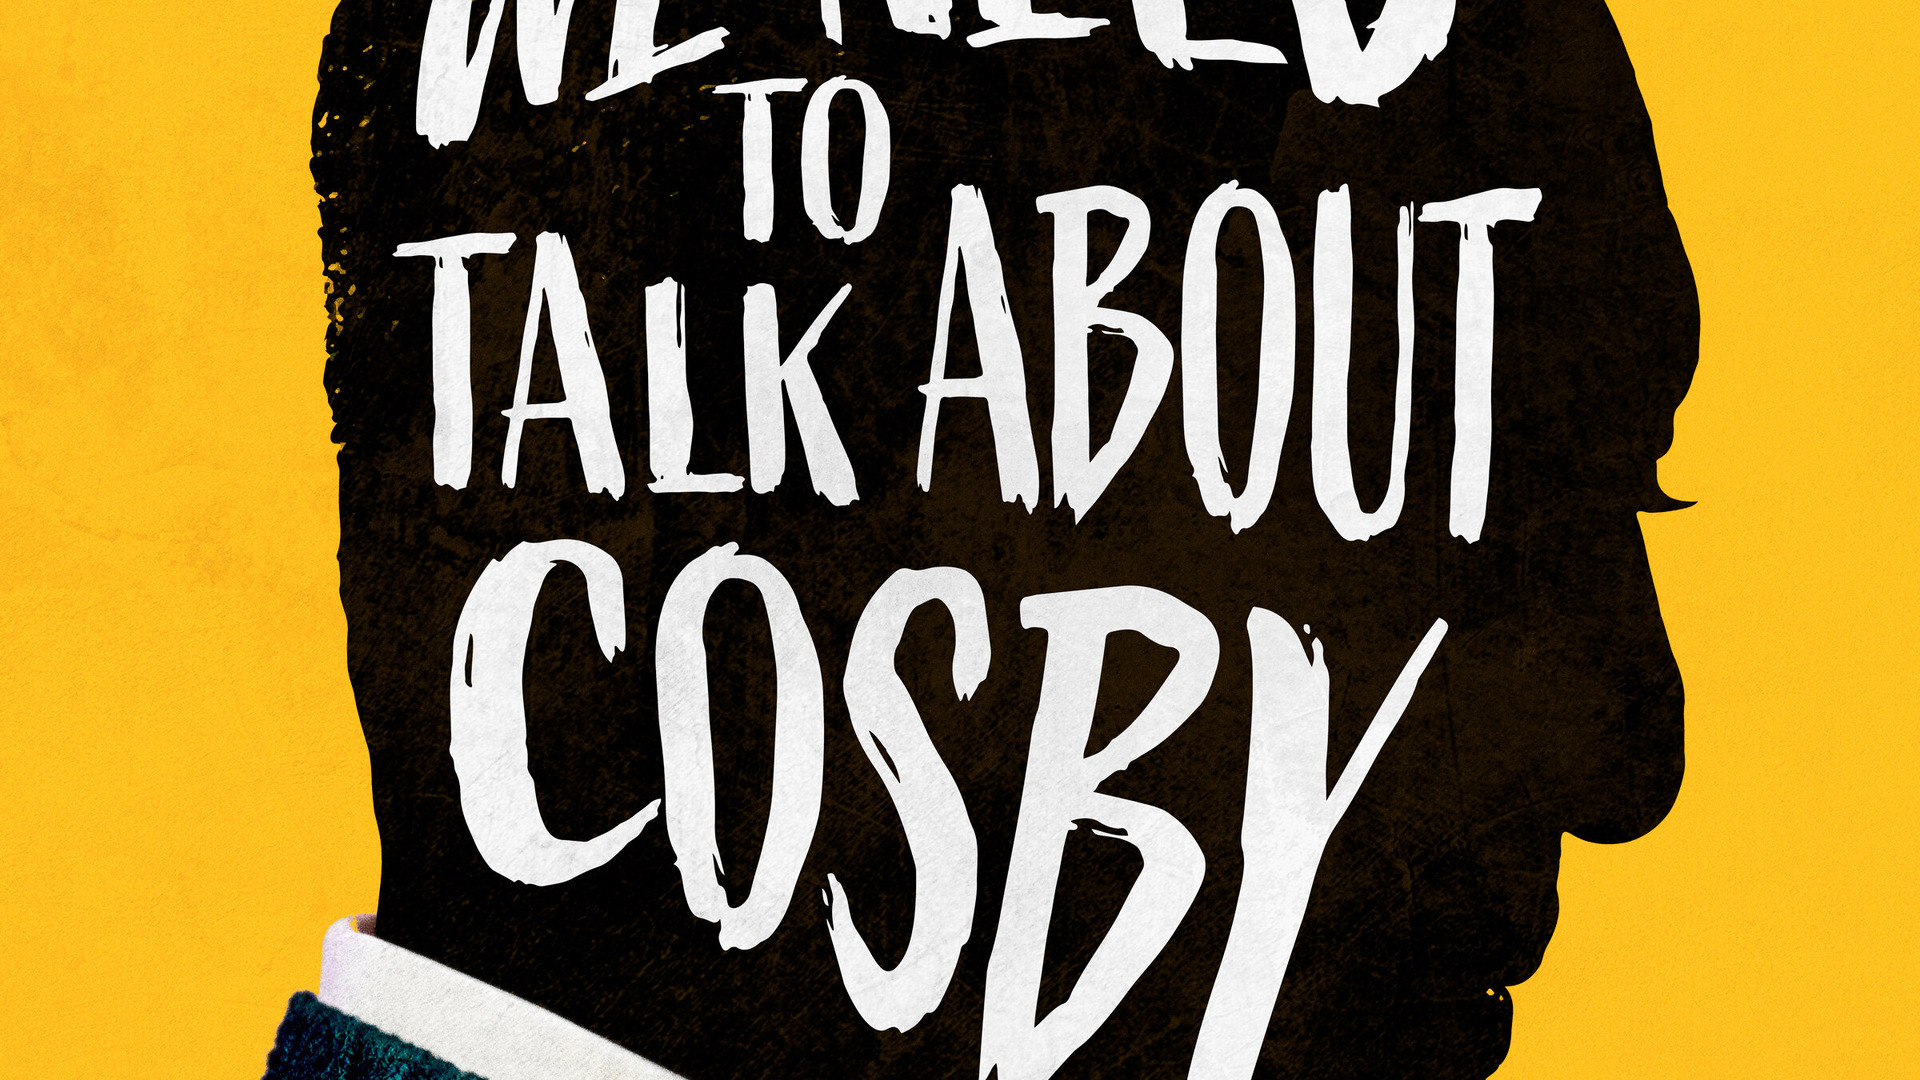 Show We Need to Talk About Cosby